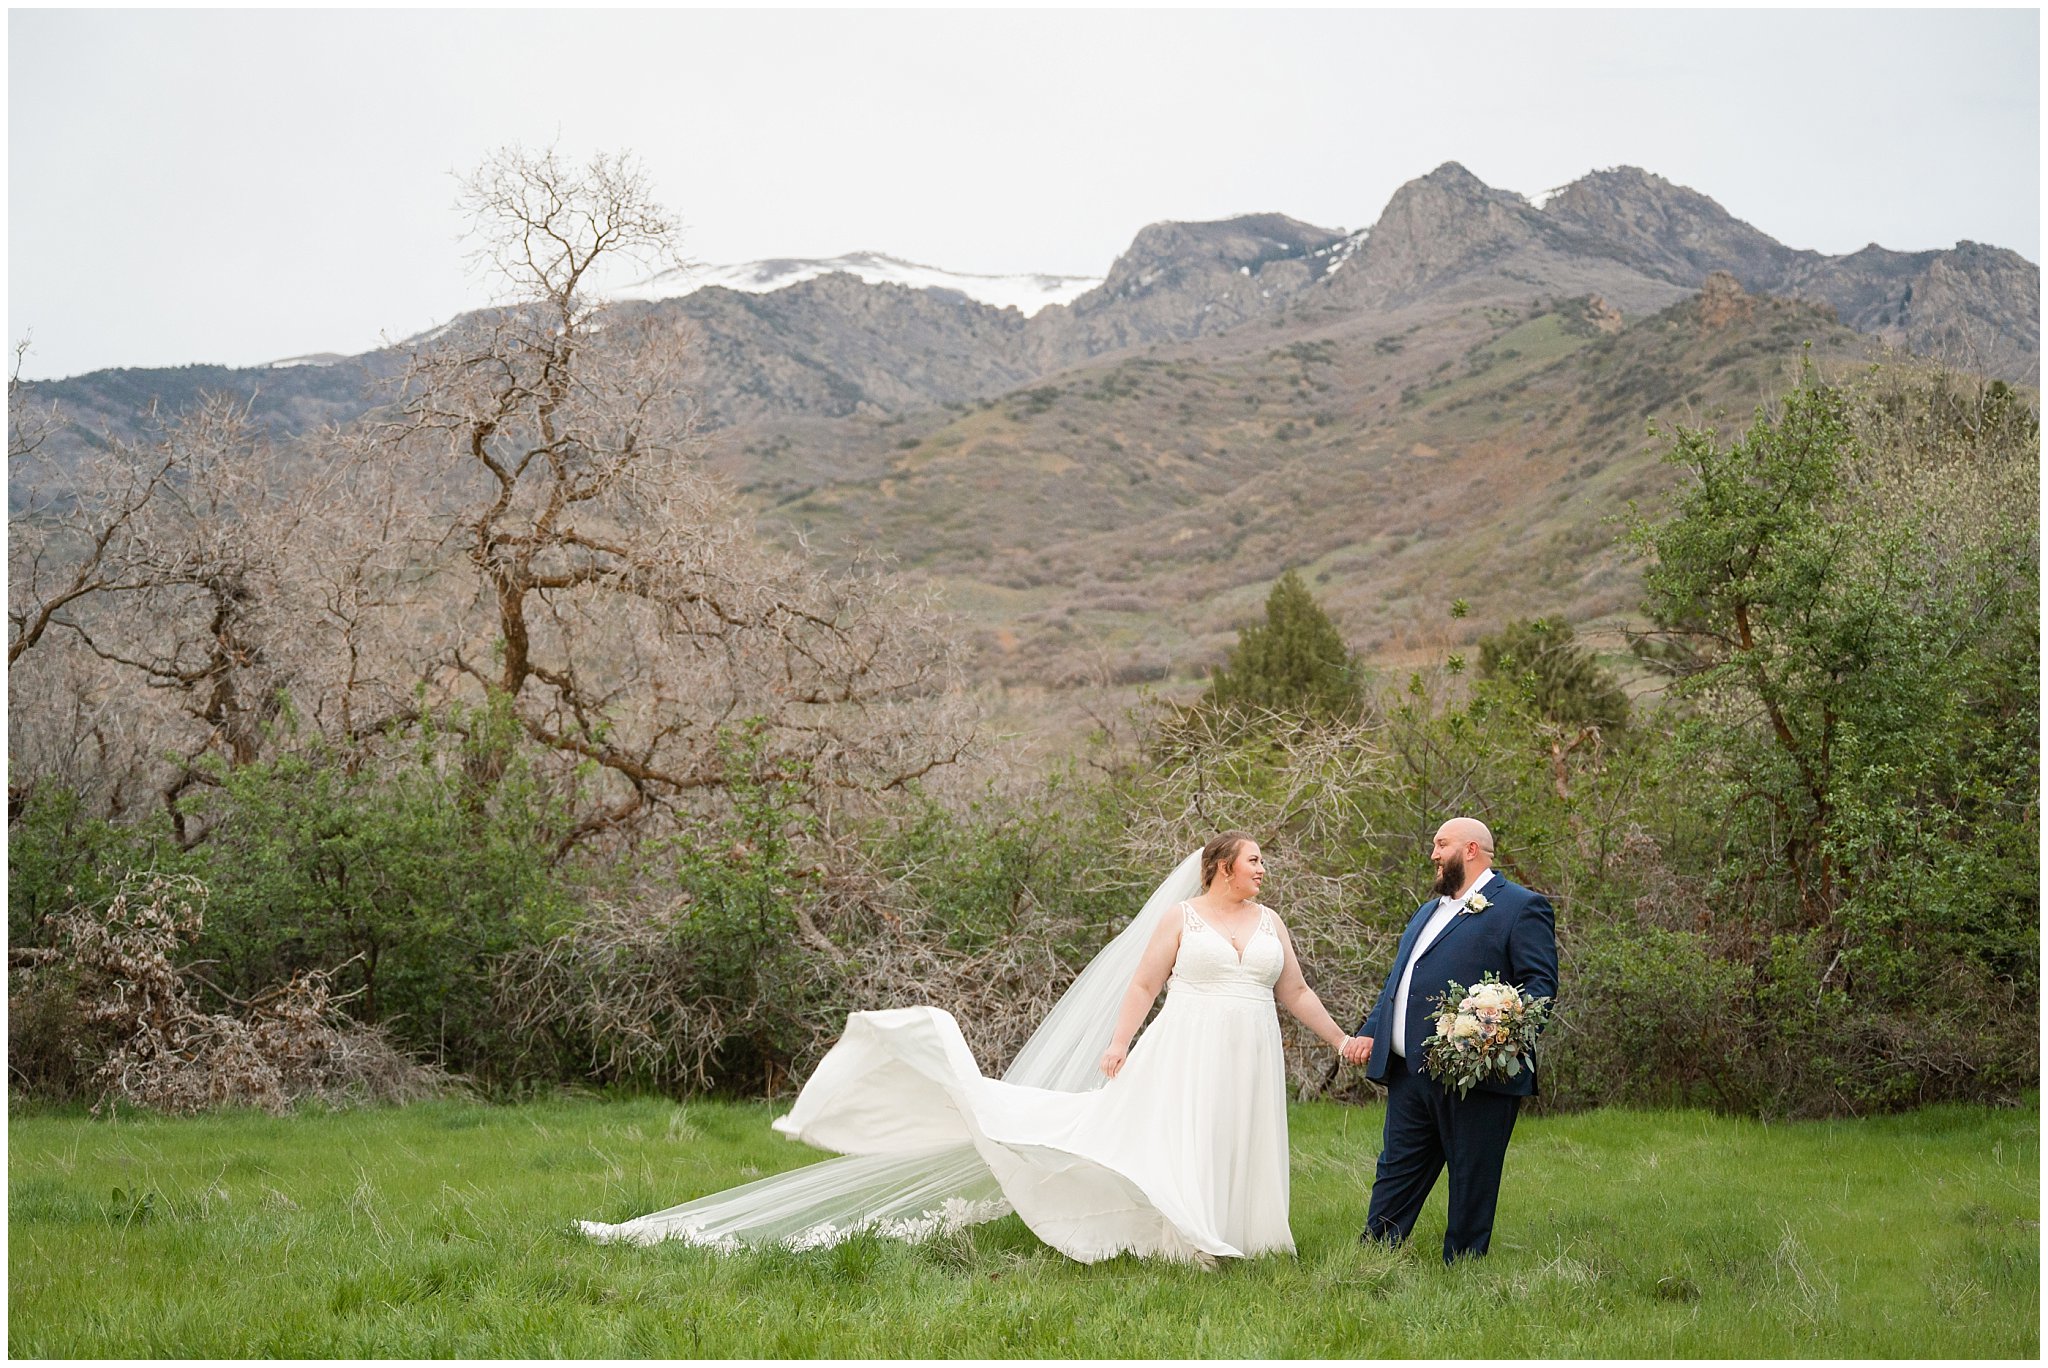 Bride and groom portraits in the mountains | Spring Mountain Wedding at Oak Hills Utah